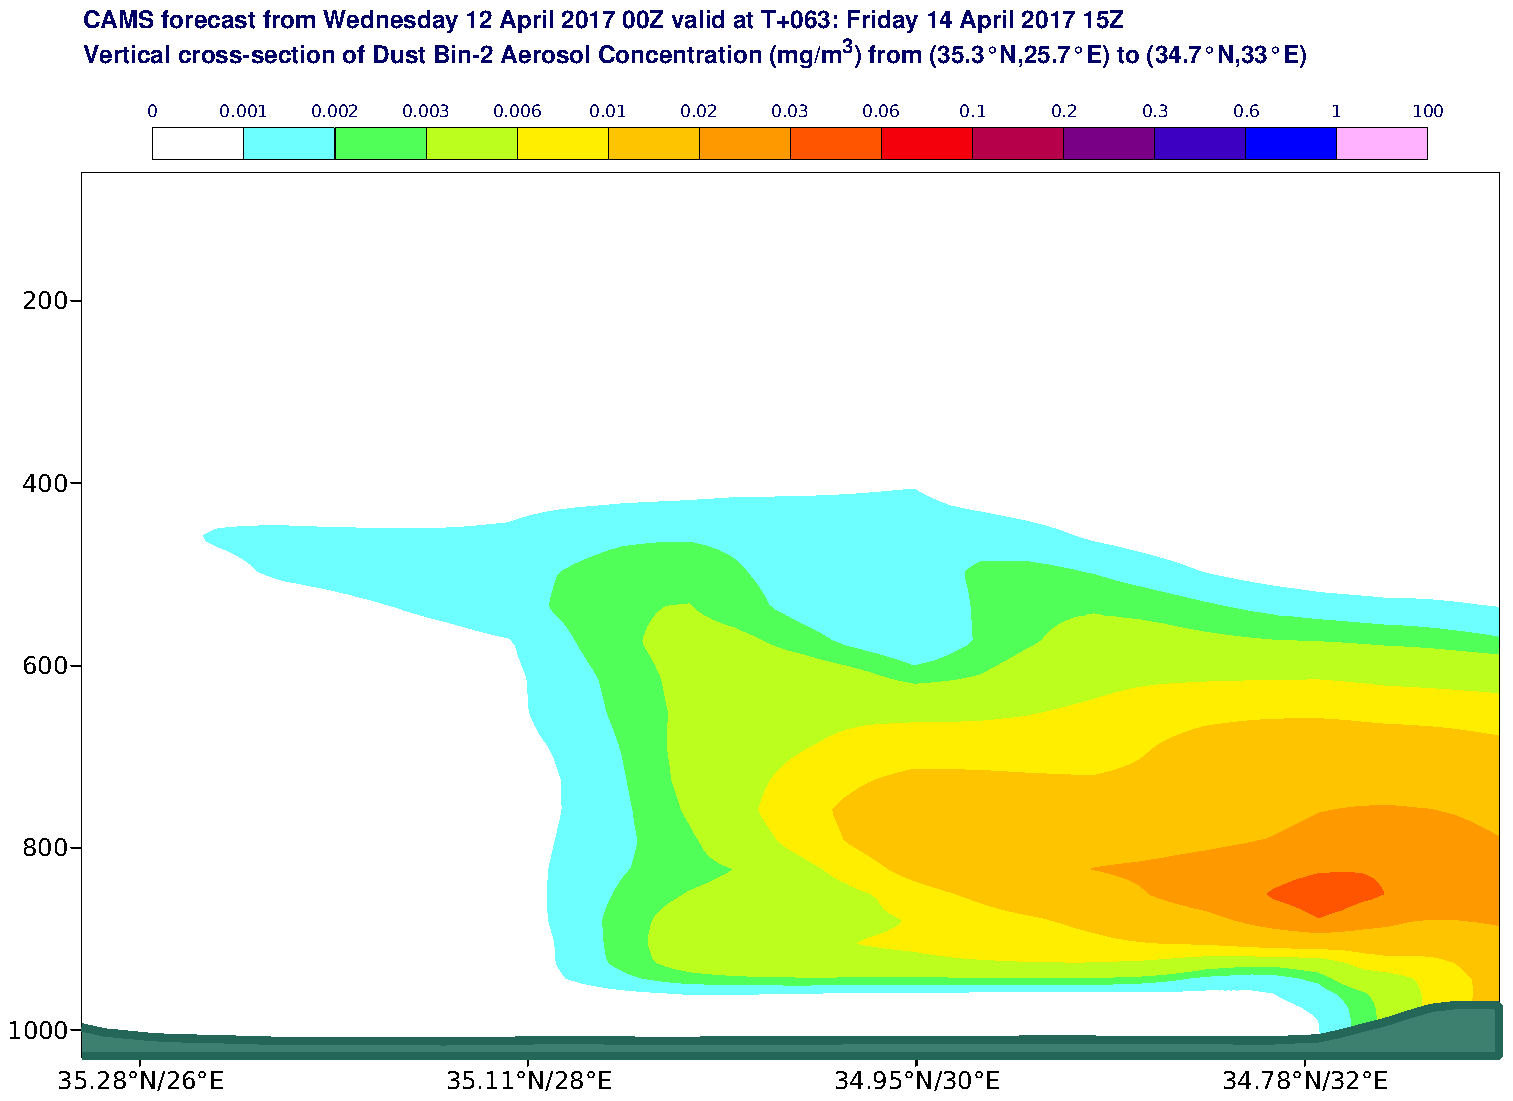 Vertical cross-section of Dust Bin-2 Aerosol Concentration (mg/m3) valid at T63 - 2017-04-14 15:00